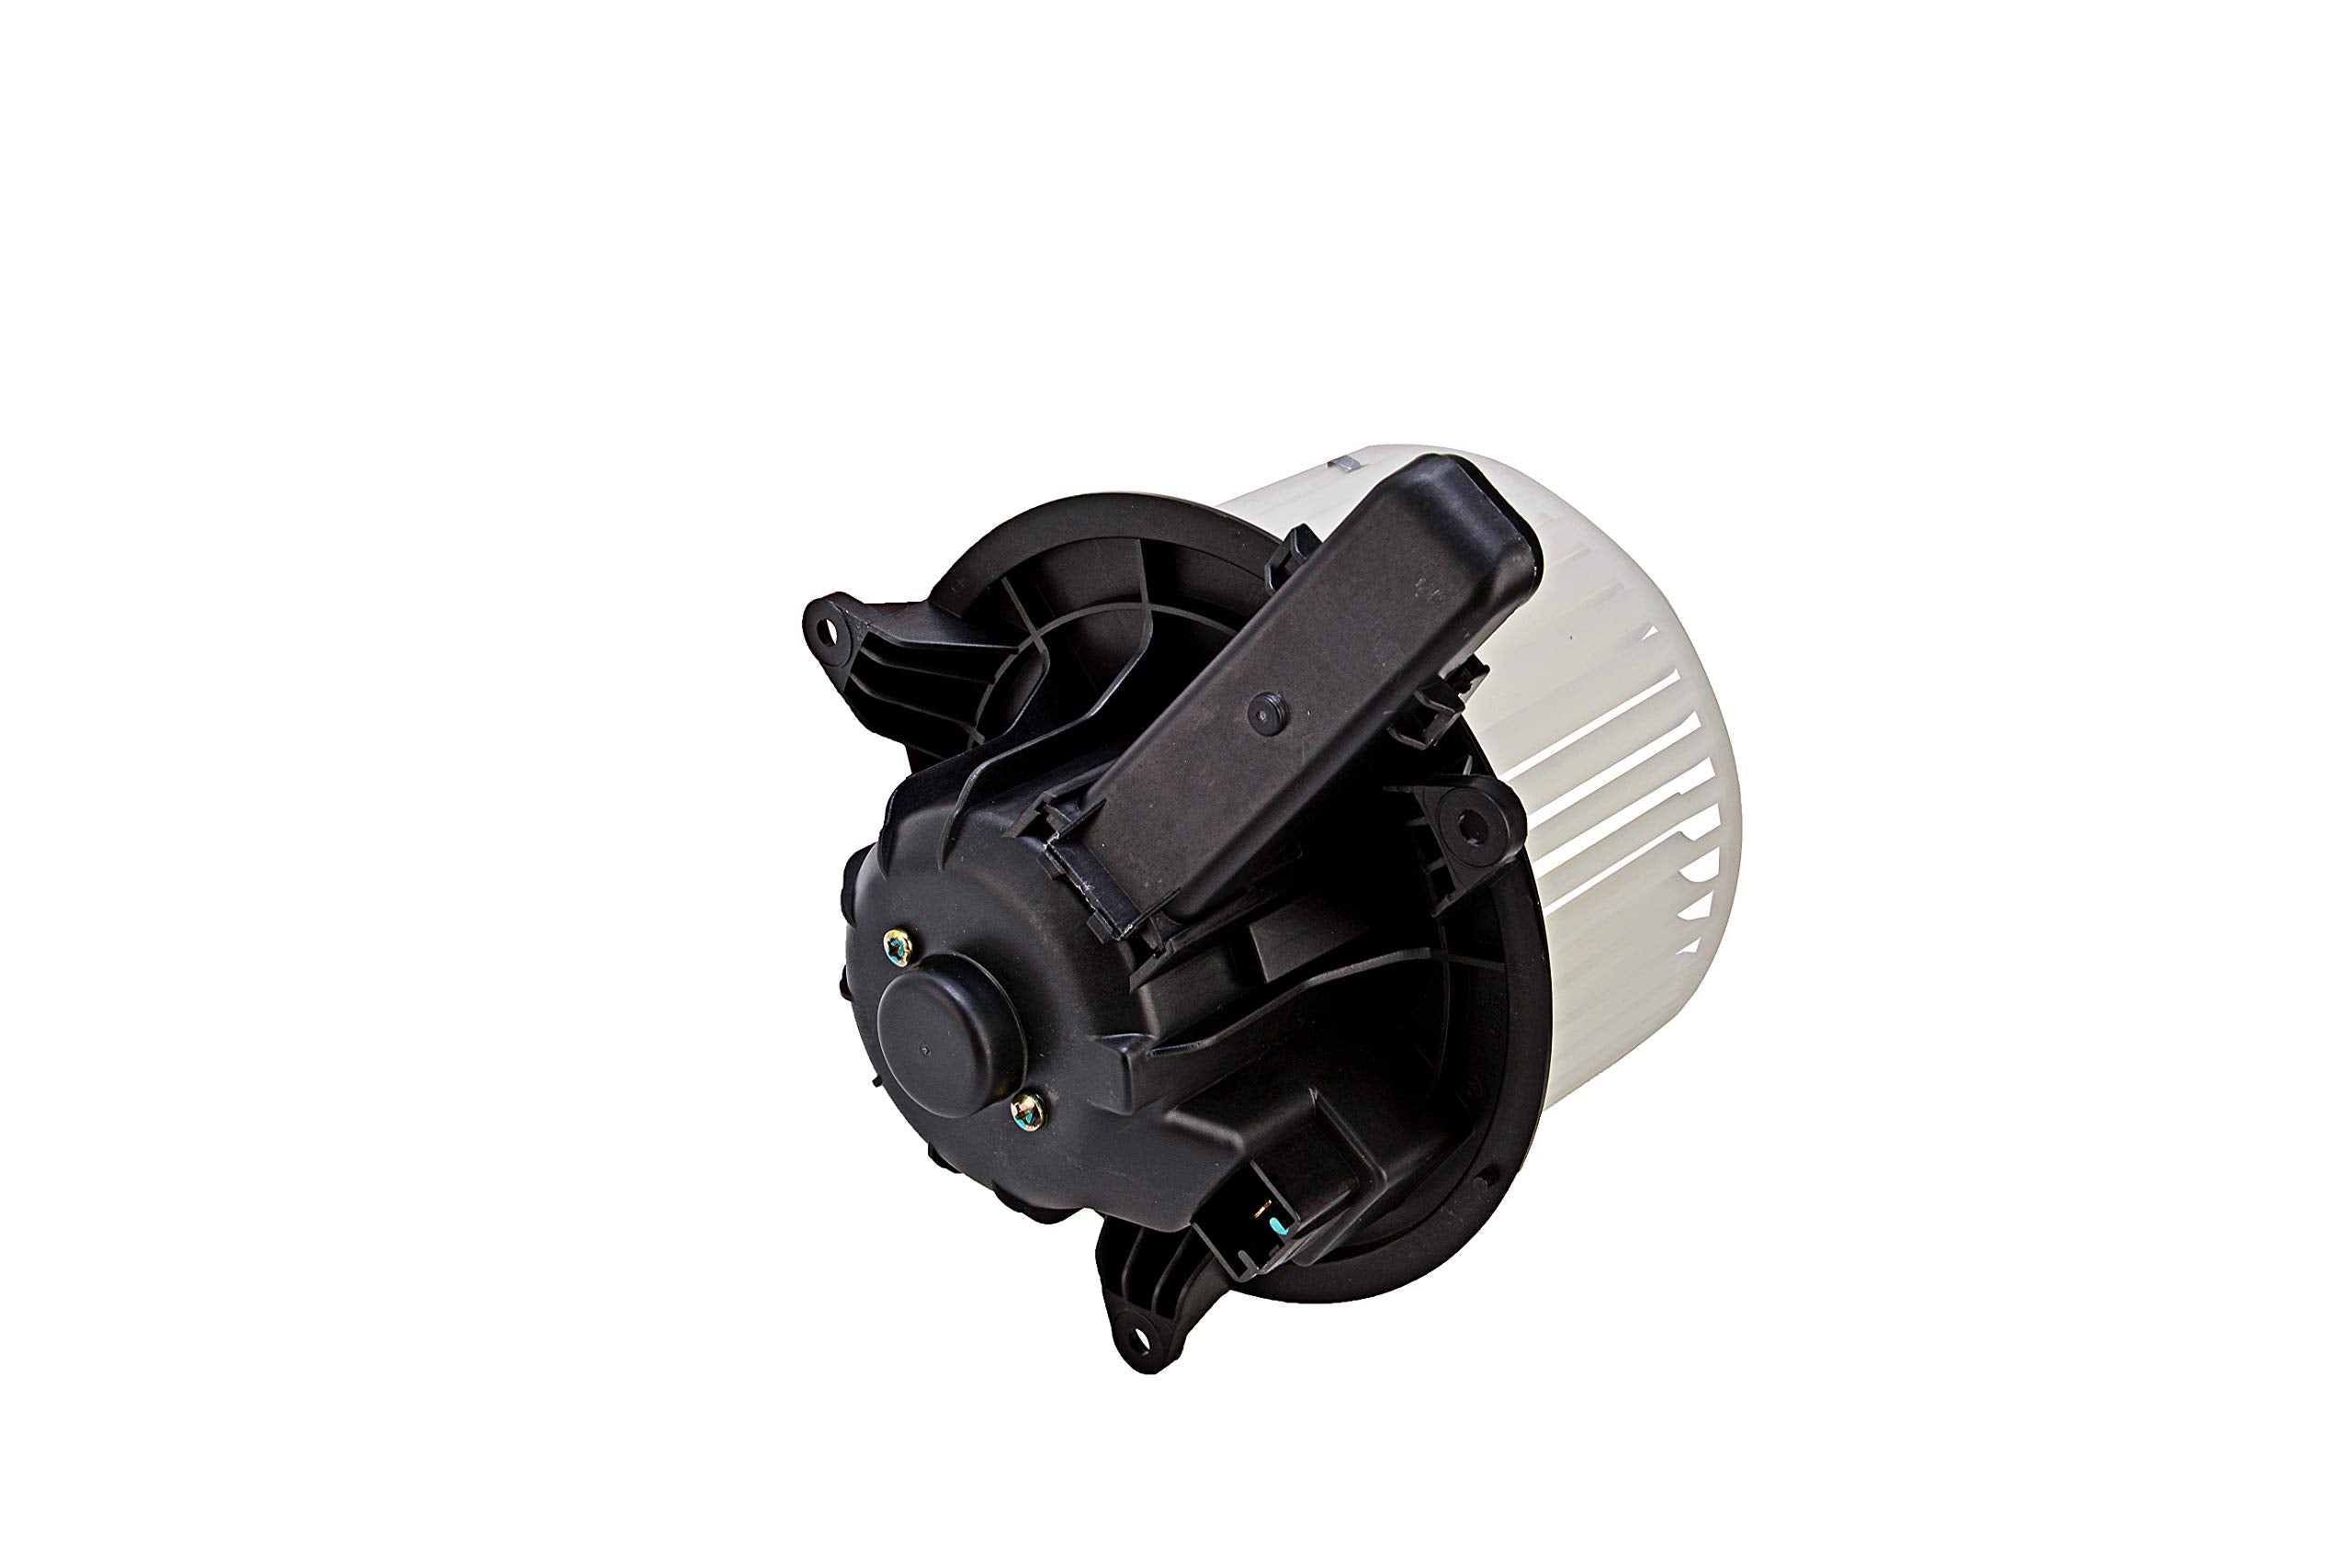 Replacement AC Heater Blower Motor with Fan - Compatible with Ford & Lincoln Vehicles - 2009-2017 Expedition, 2009-2014 F-150, 2009-2017 Navigator - Replaces CL1Z19805A, MM1094, PM9364, 75873, 700237  - Very Good